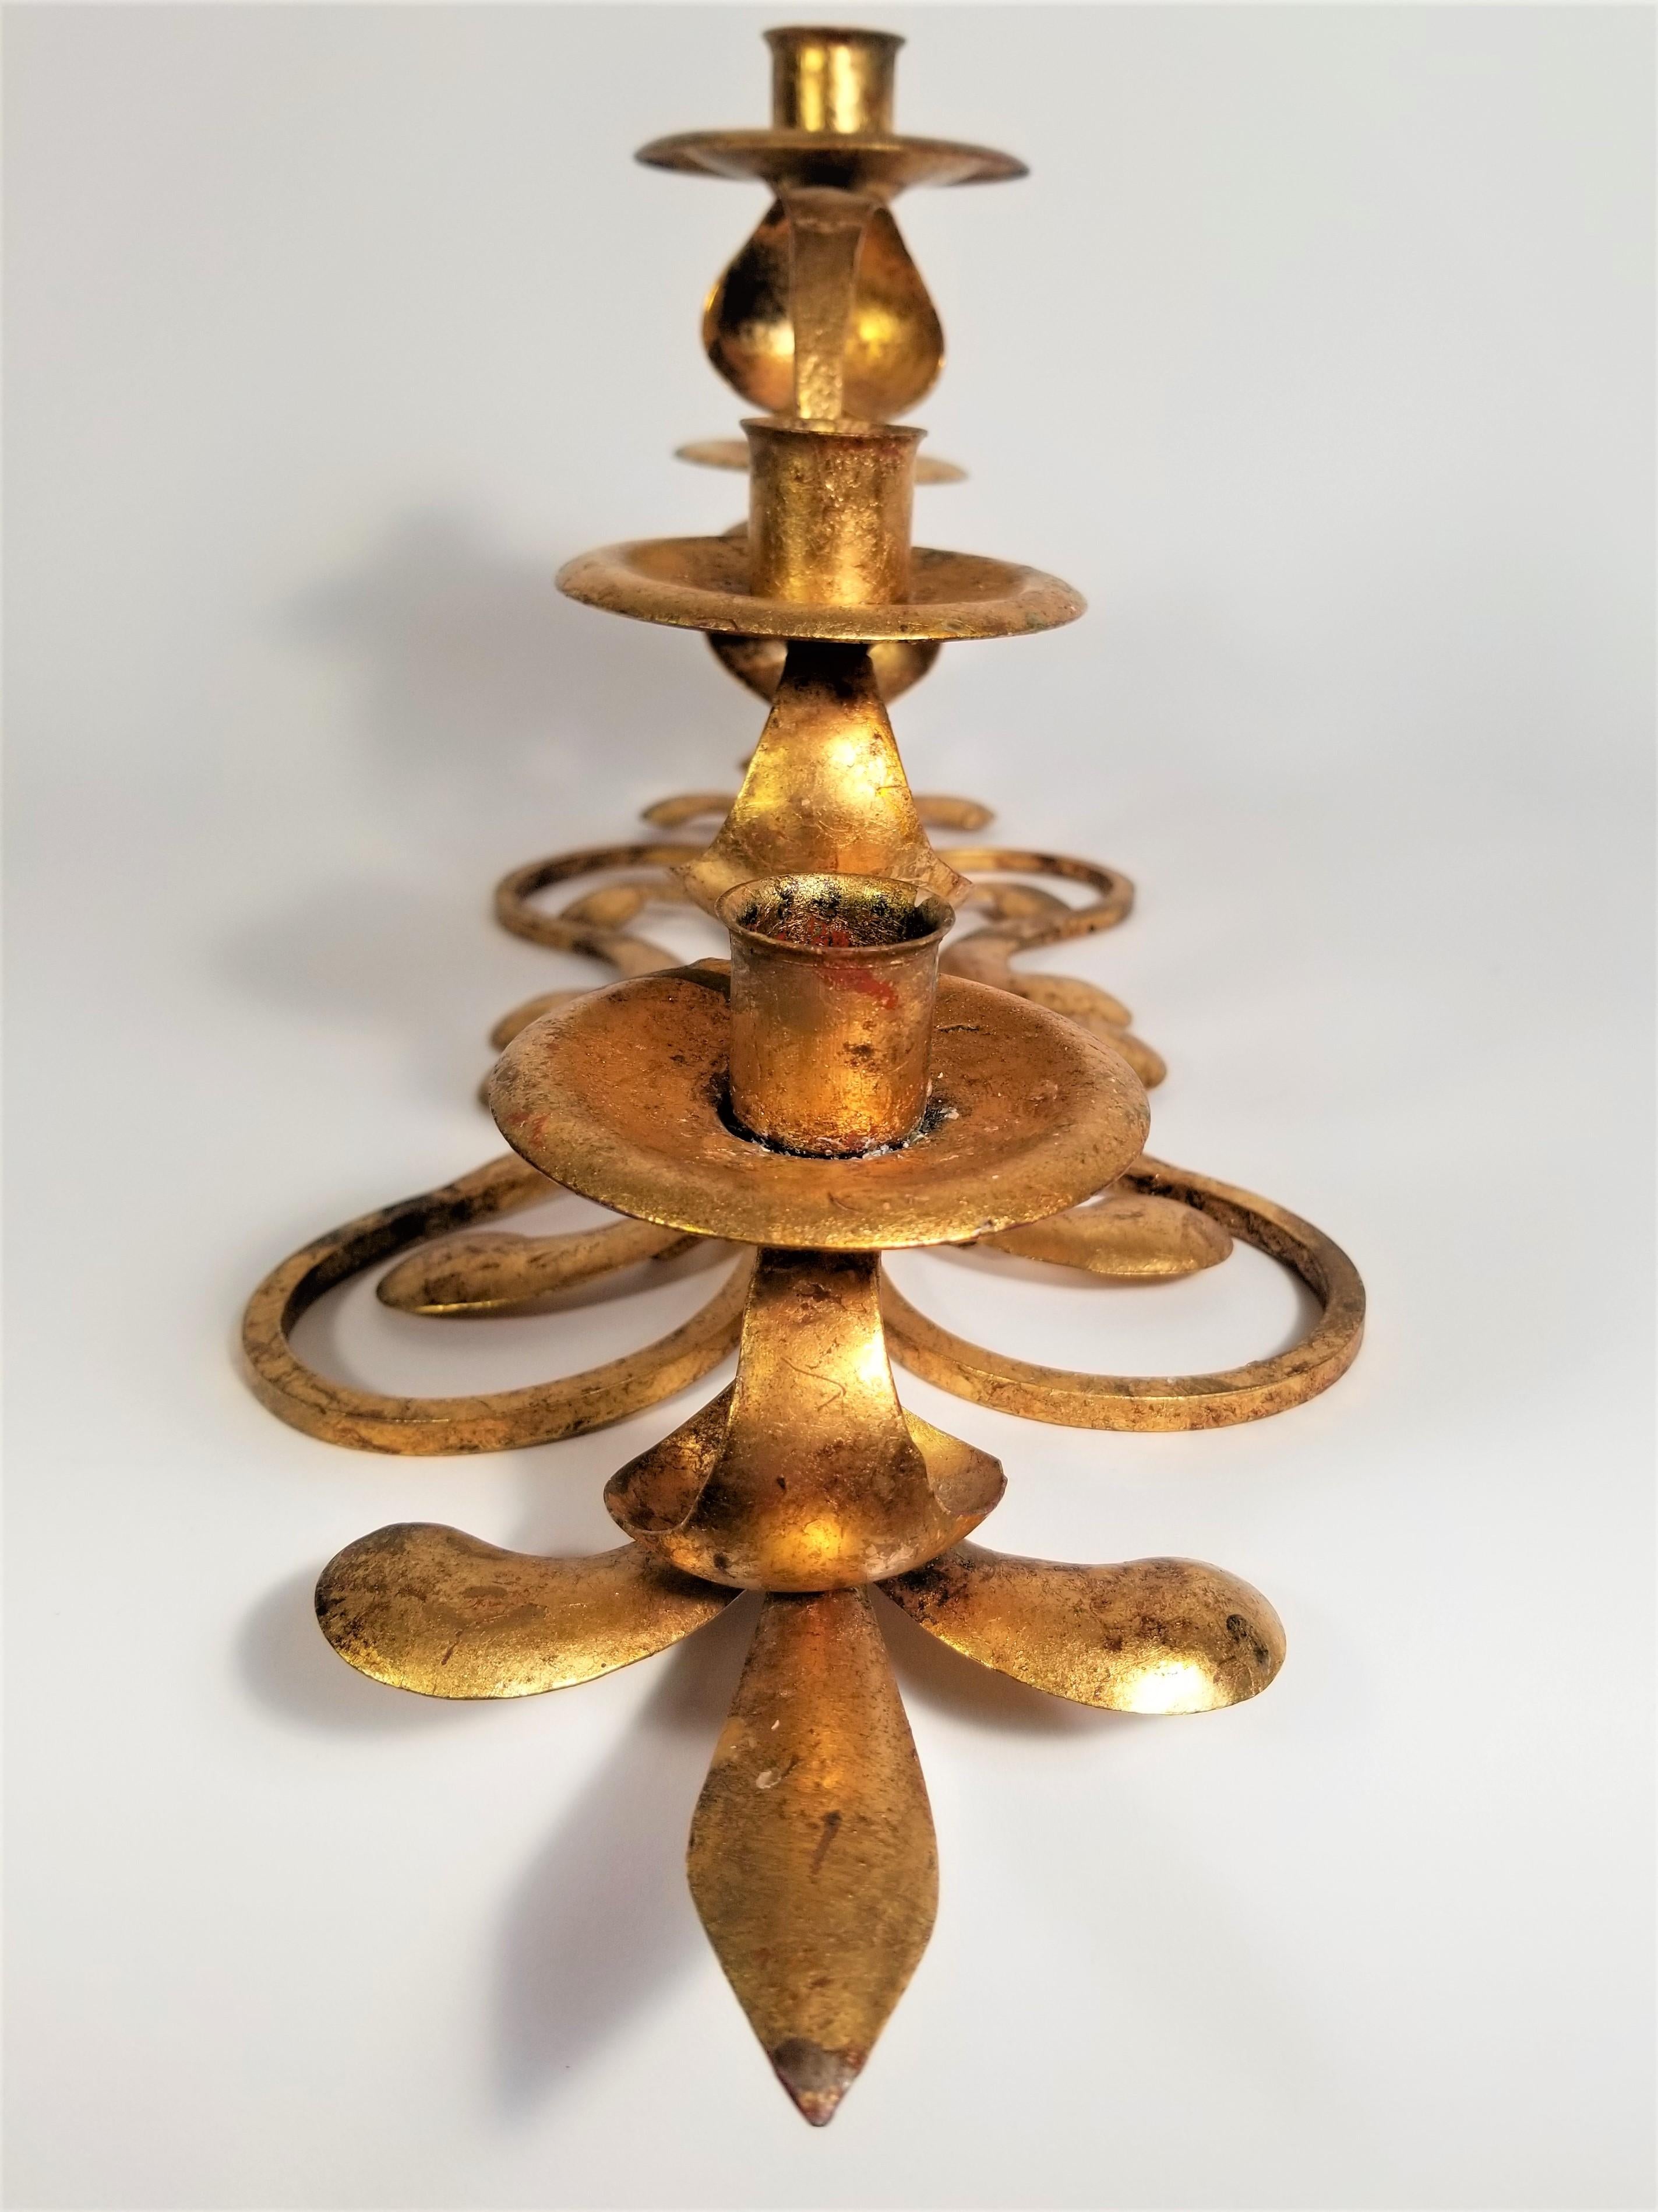 20th Century Italian Signed S. Salvadori  Gilded Candelabra, 1950s  Made in Italy For Sale